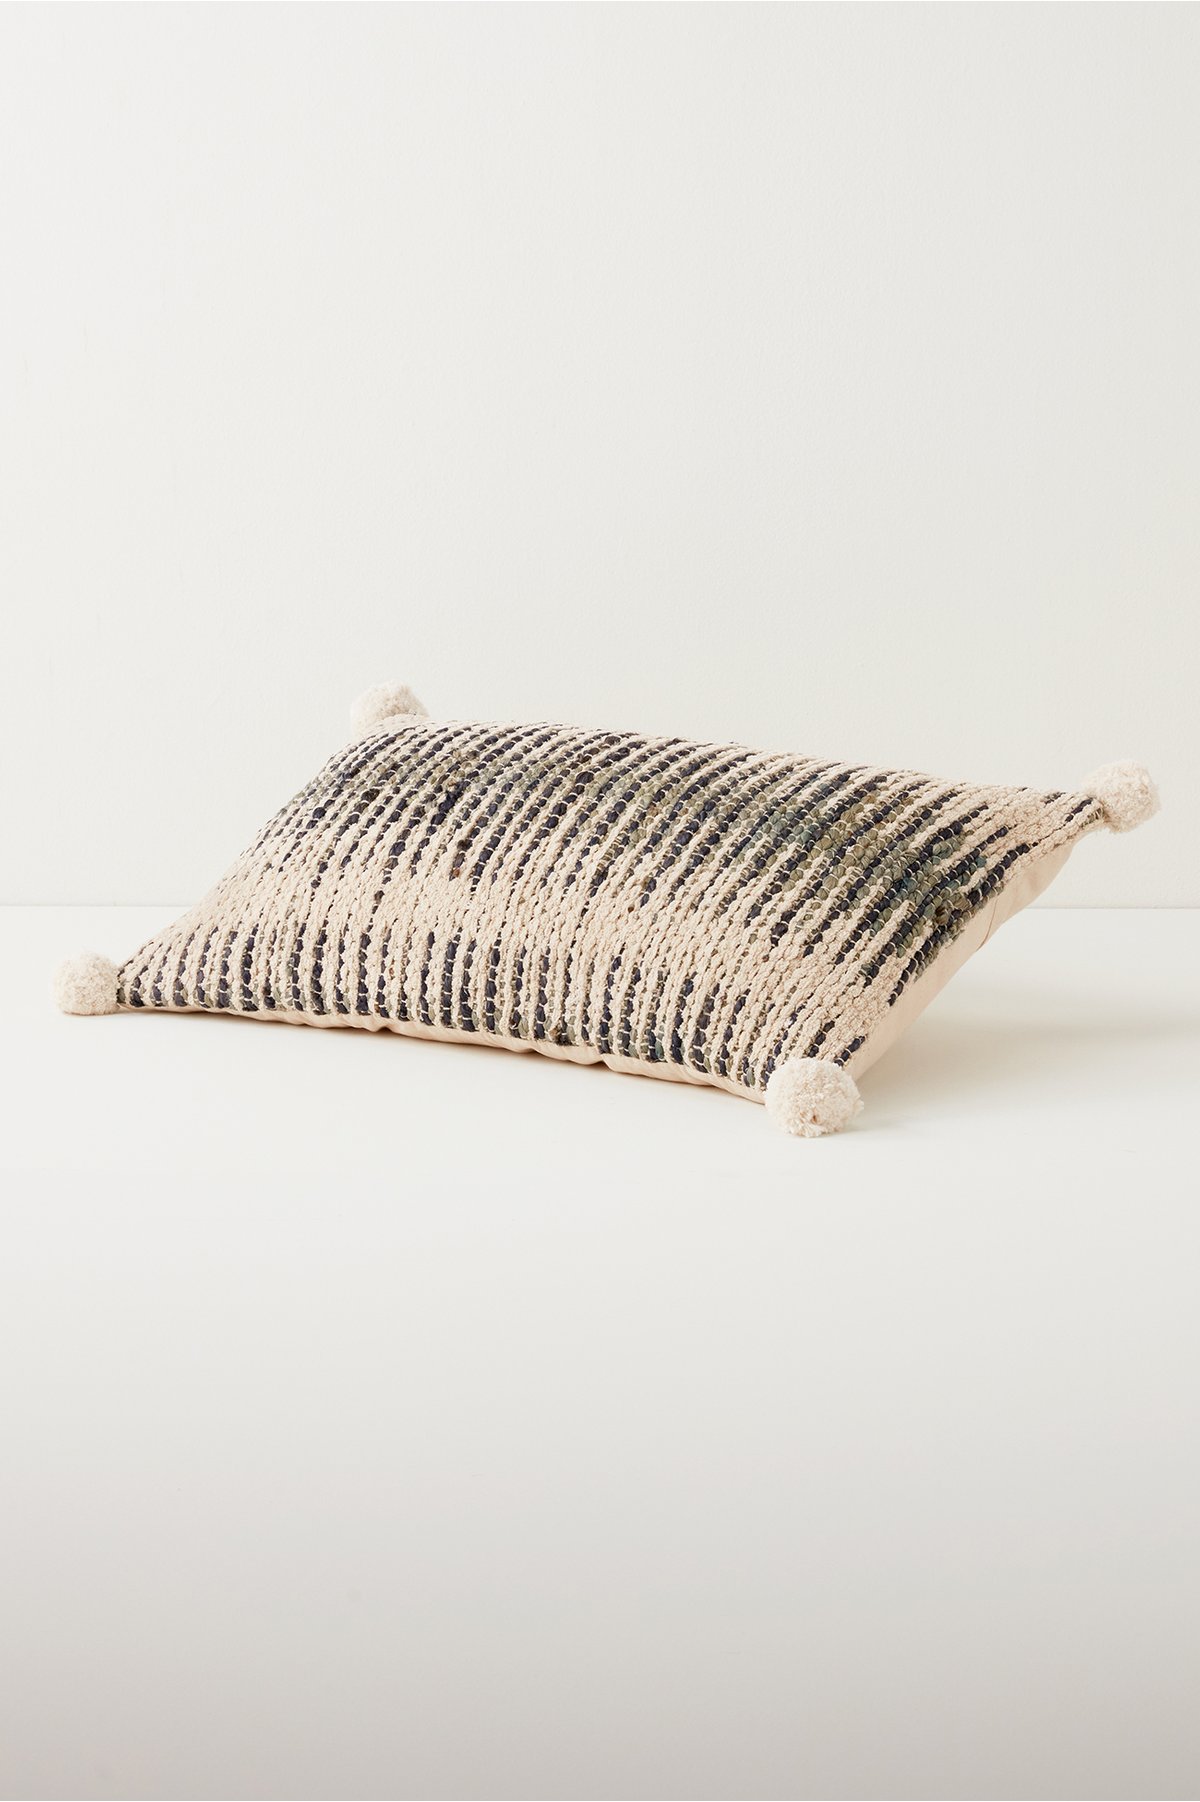 Penny Pom Pillow by Soft Surroundings, in Blue Neu...